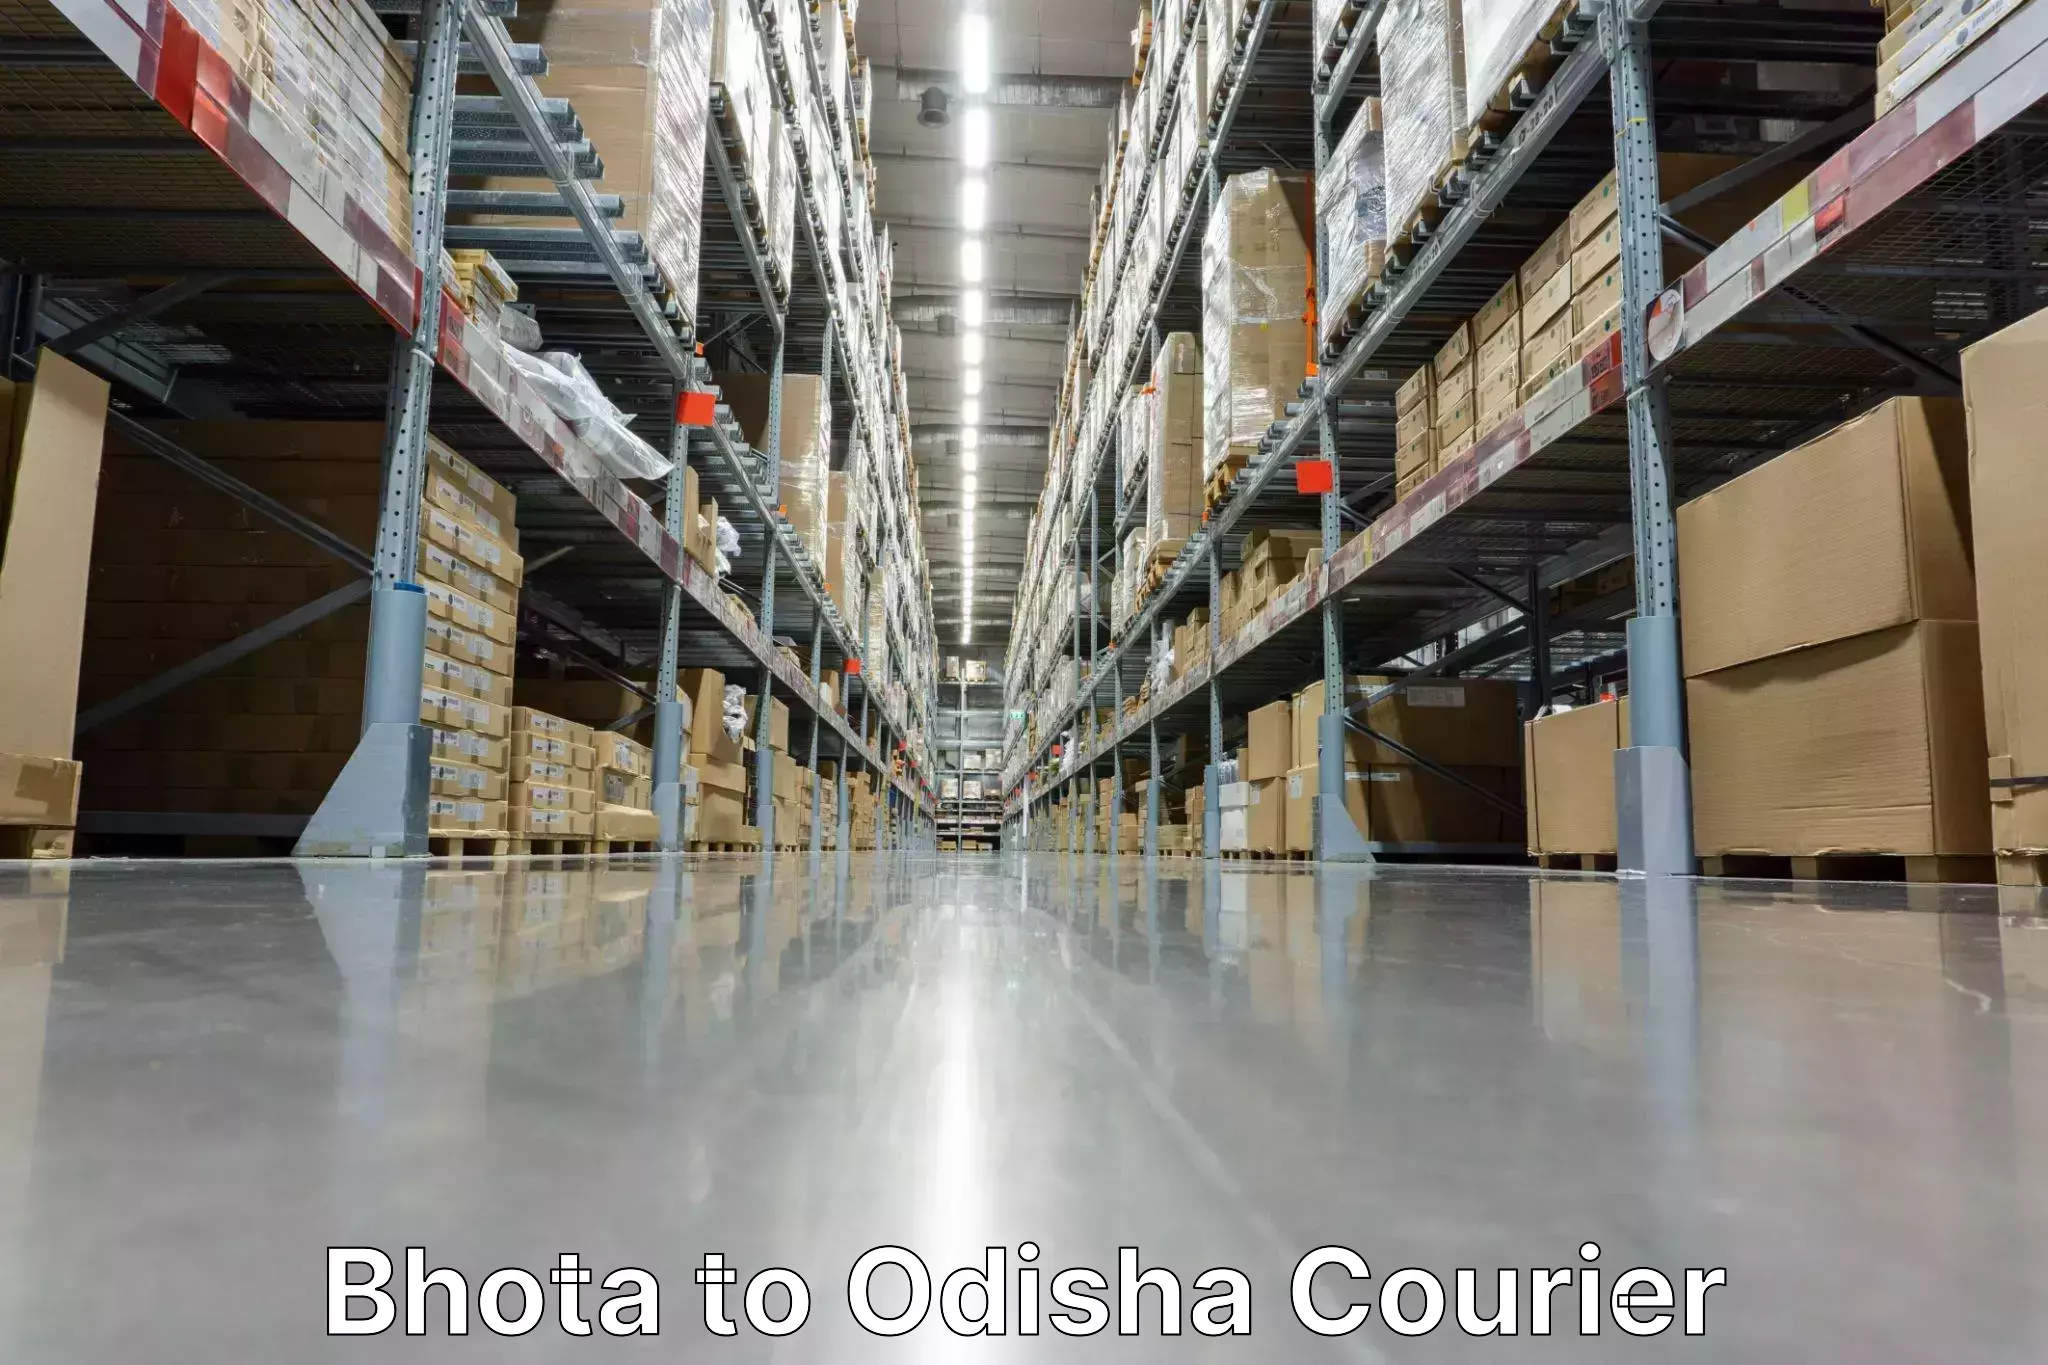 Sustainable courier practices Bhota to Odisha